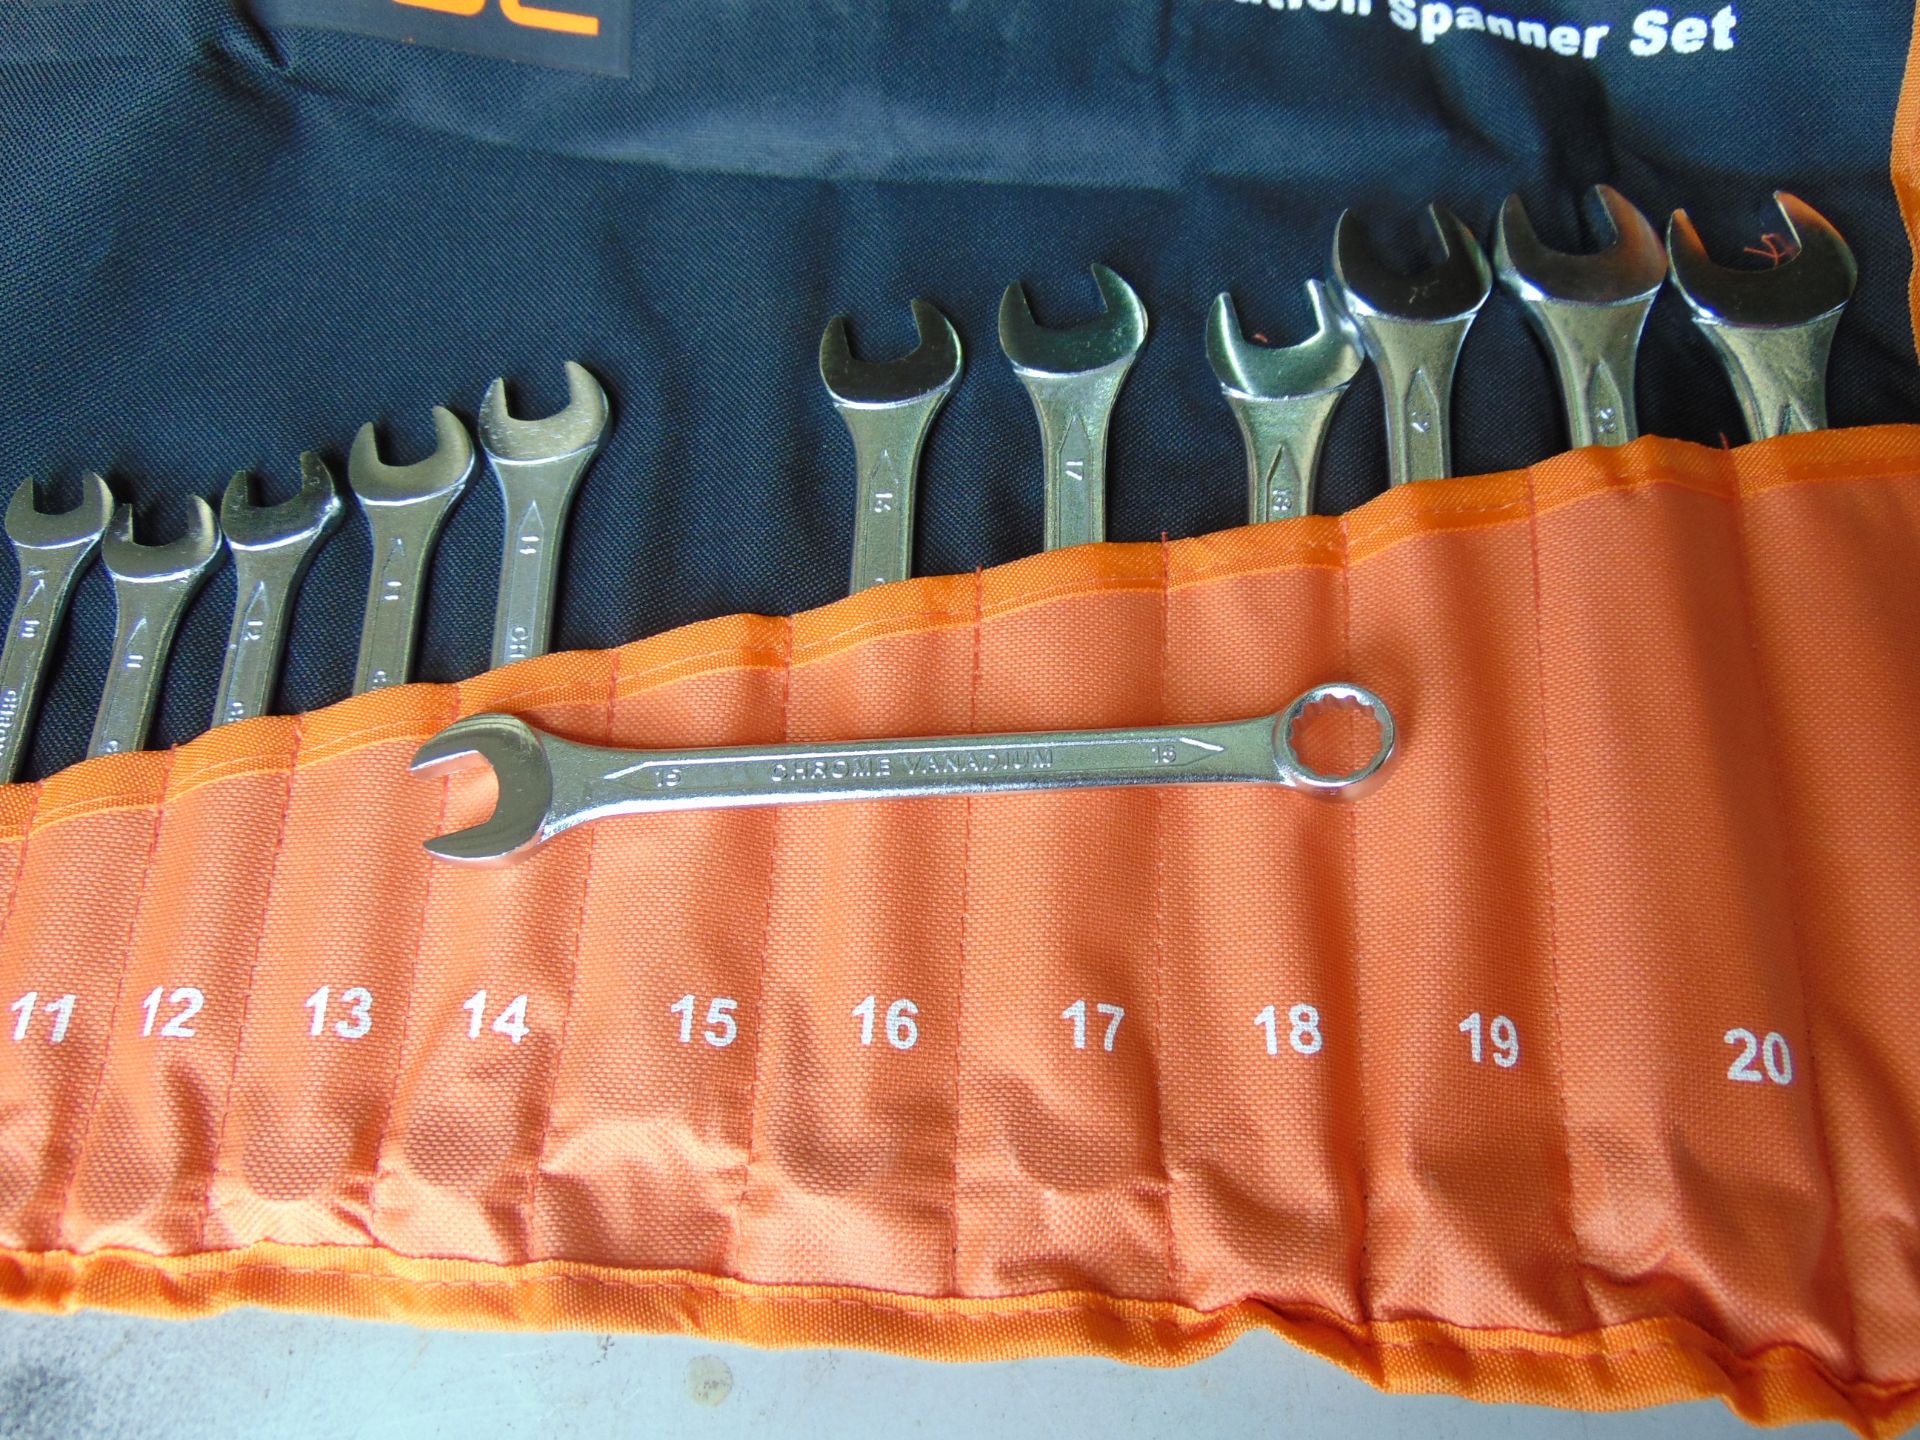 New Unissued 14 PCs Metric Combination Spanner Set - Image 4 of 4